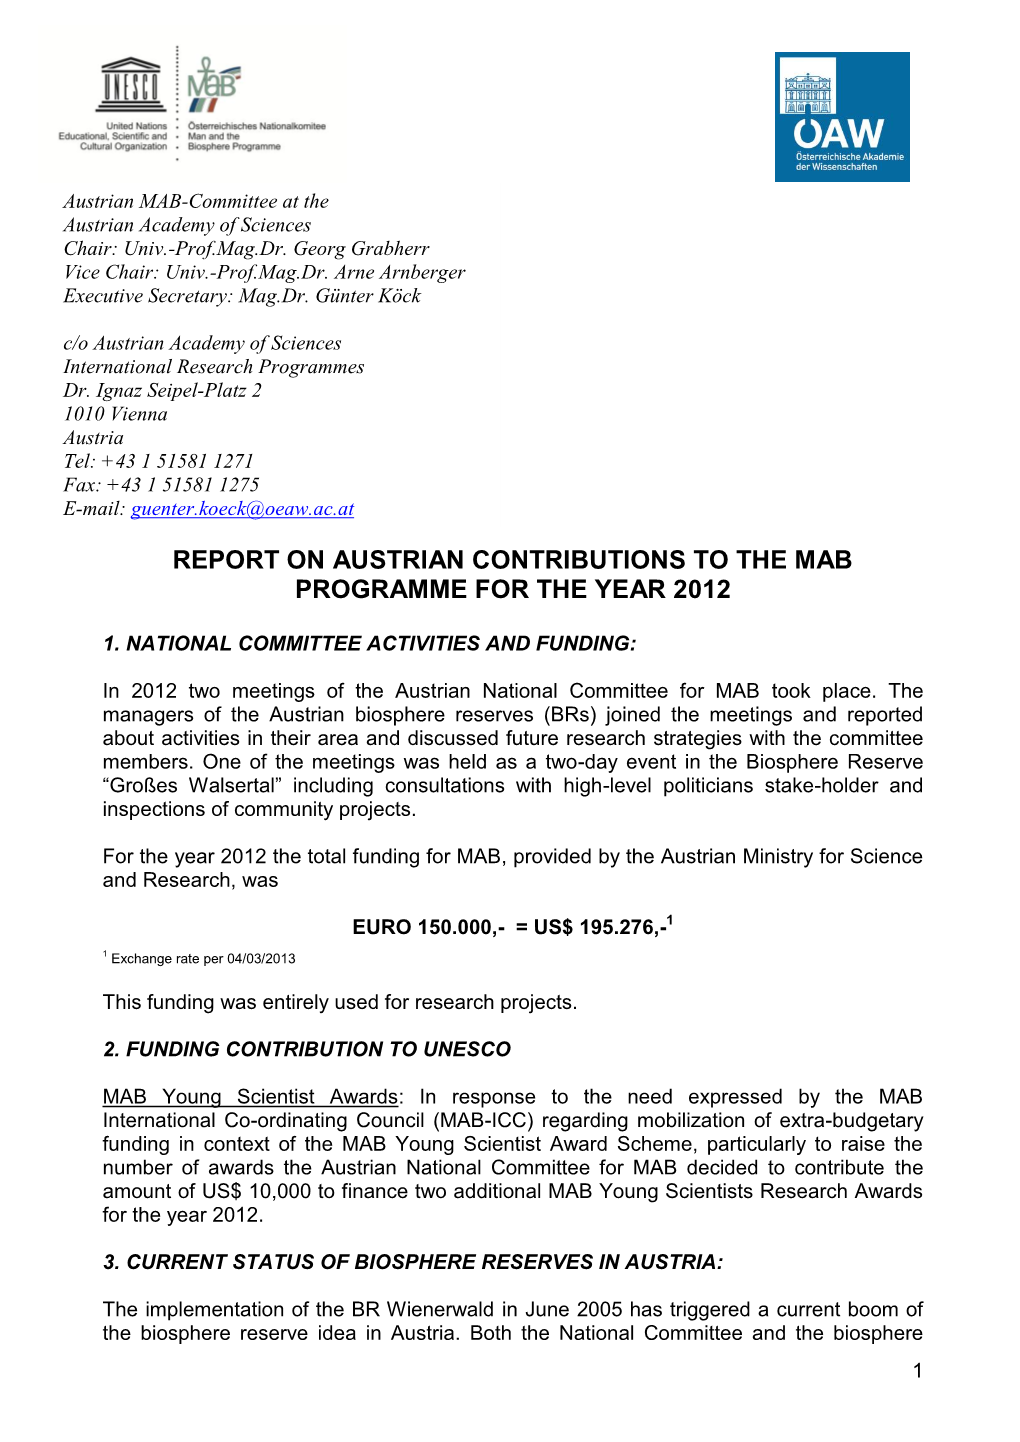 Report on Austrian Contributions to the Mab Programme for the Year 2012